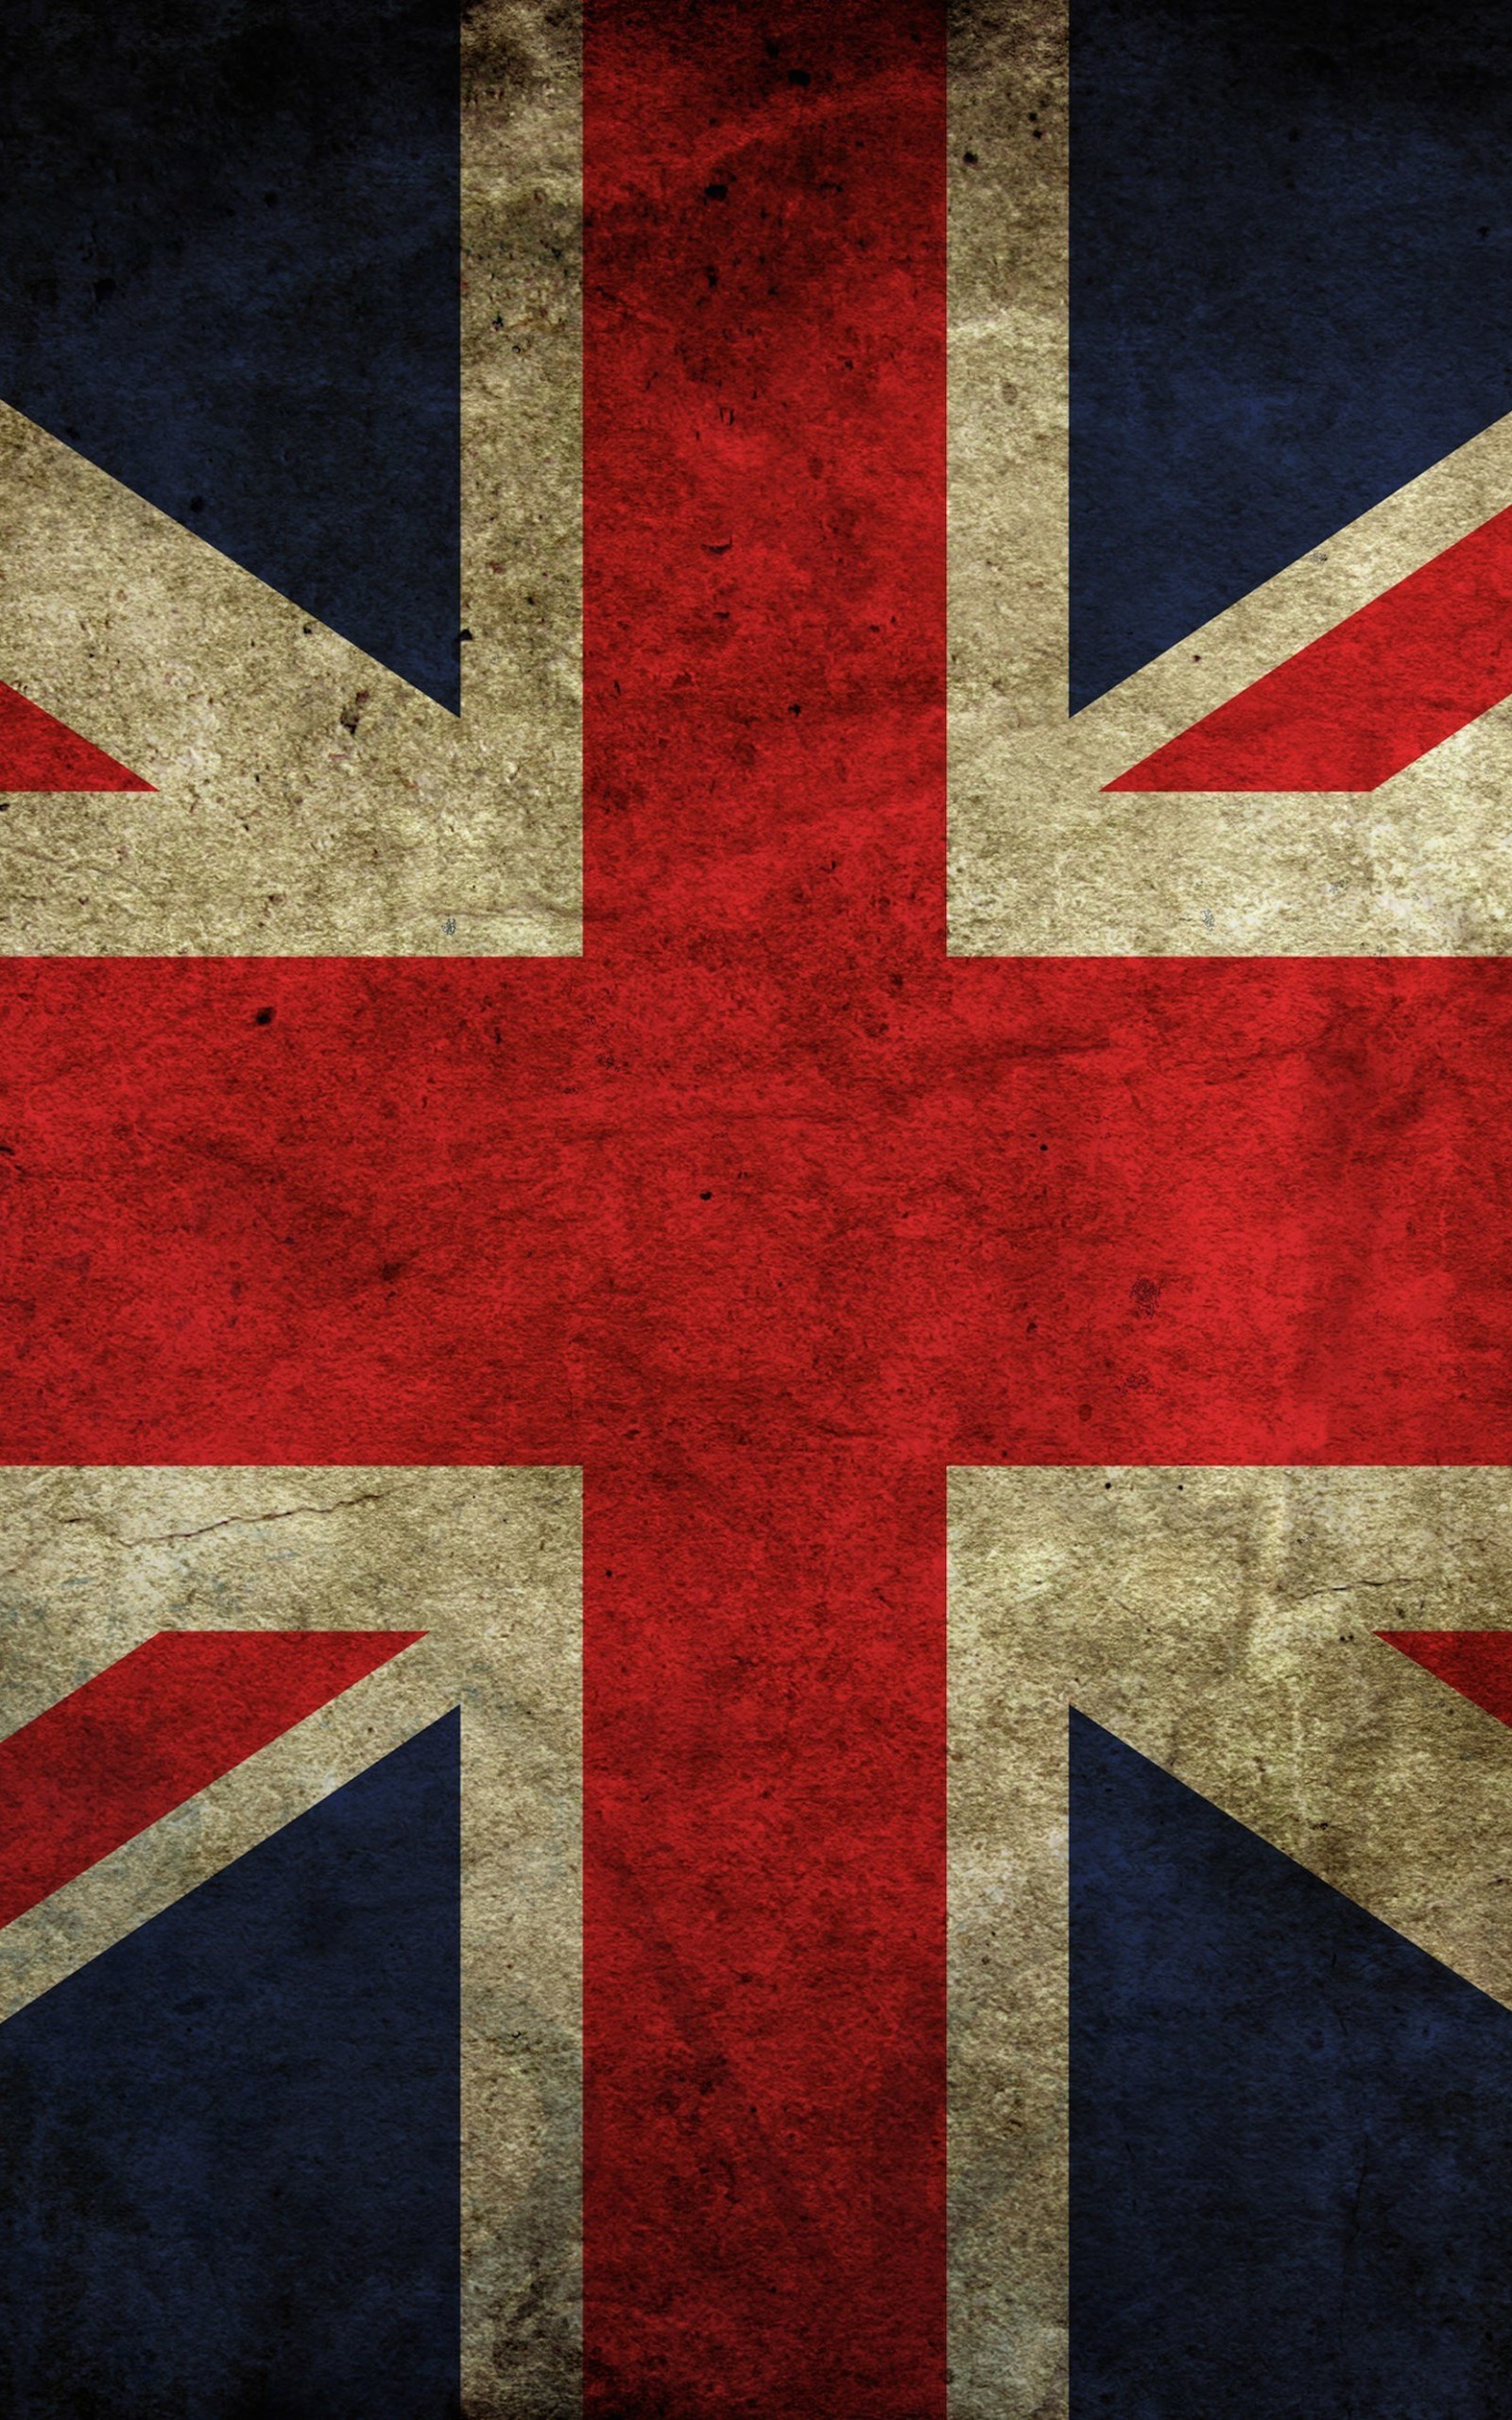 Grunge Flag Of The United Kingdom Wallpaper for Amazon Kindle Fire HDX 8.9